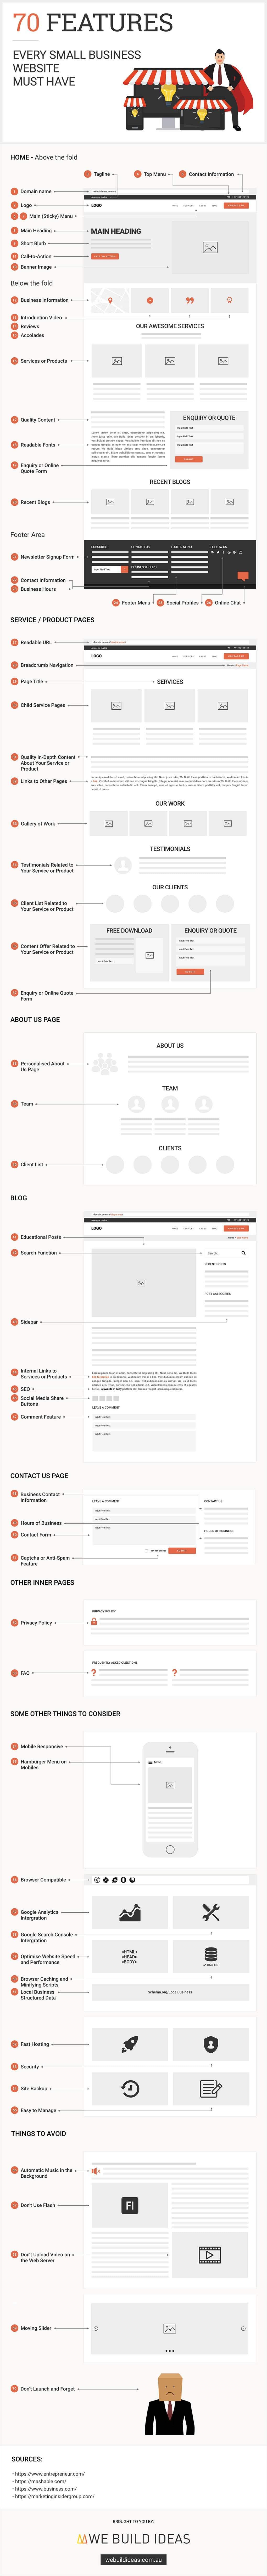 70 Features Every Small Business Website Must Have #infographic